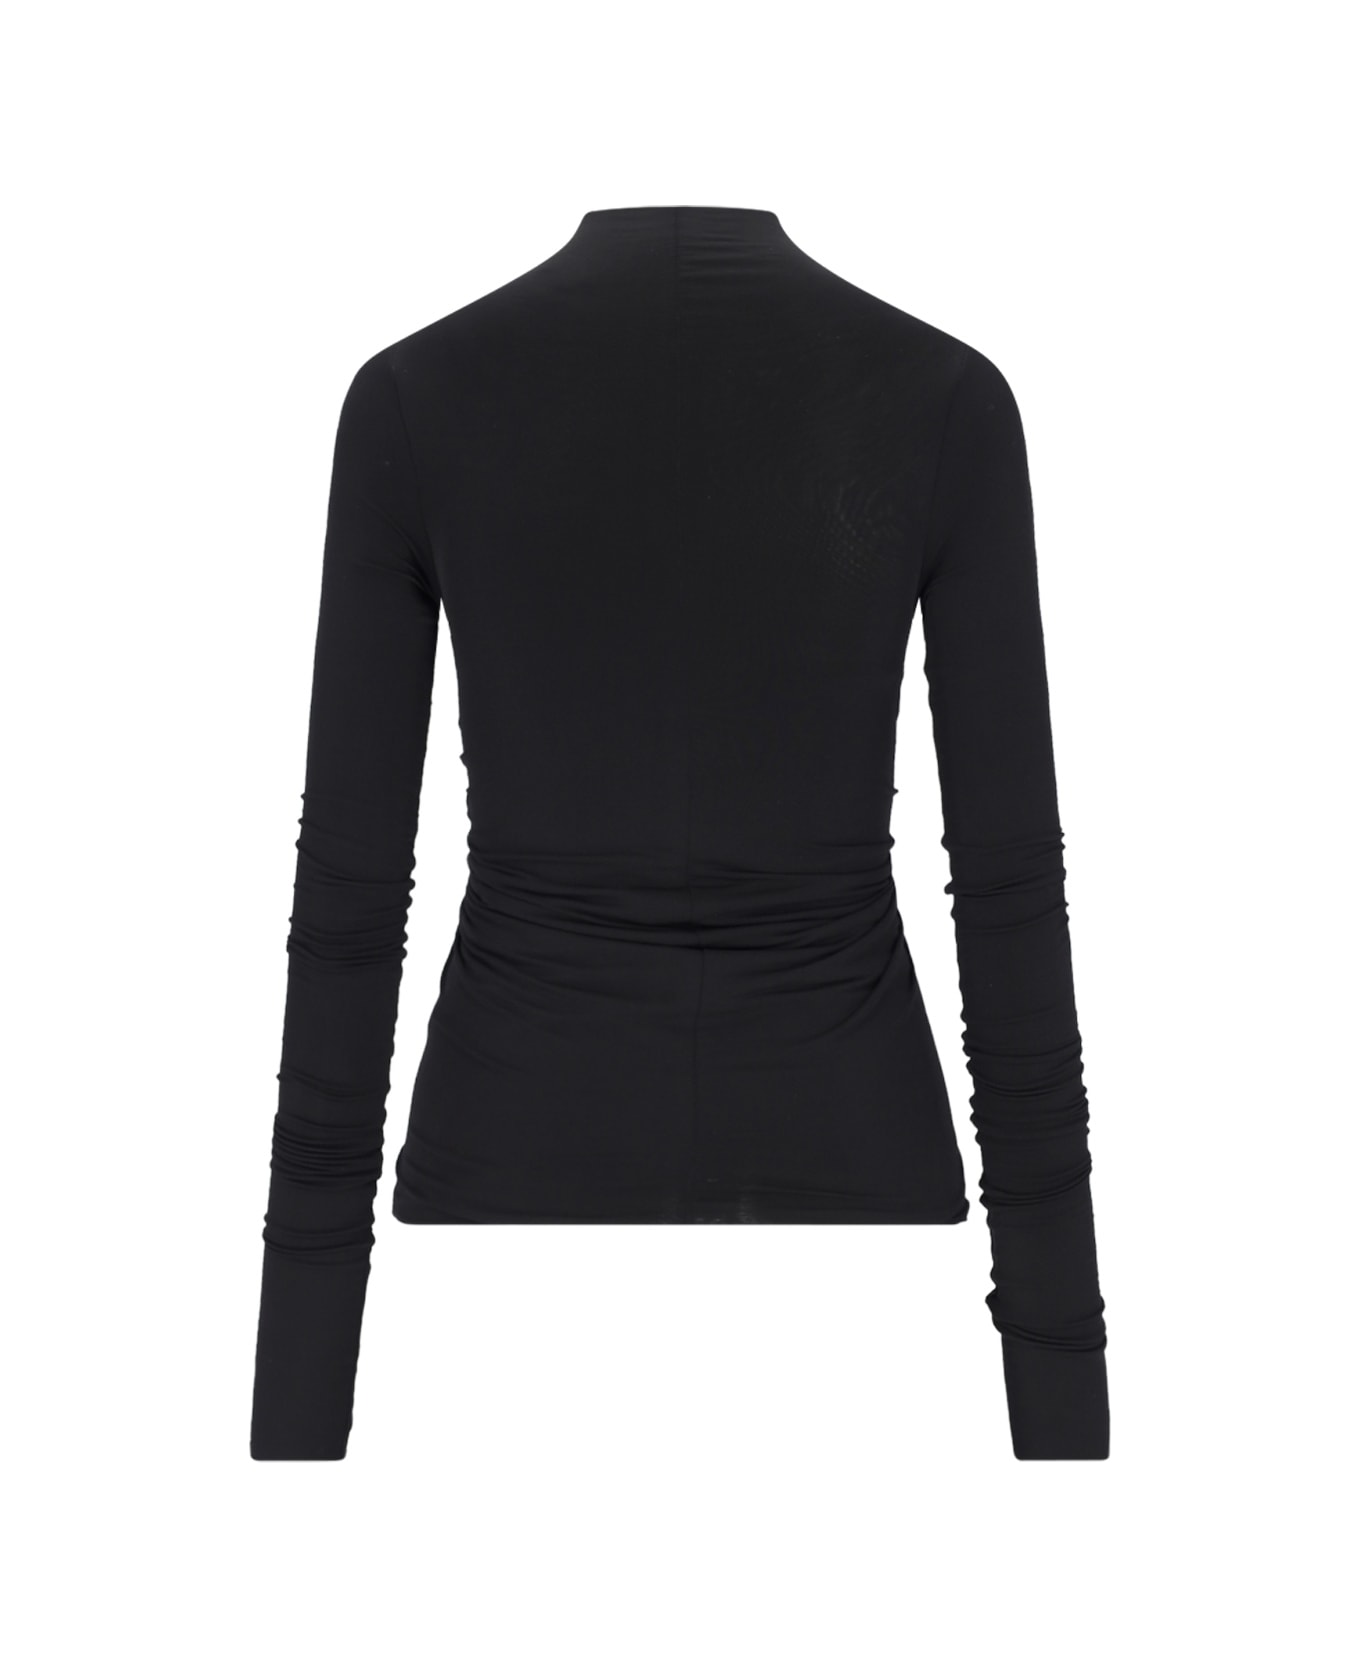 Rick Owens Cut-out Detail Sweater - Black   トップス